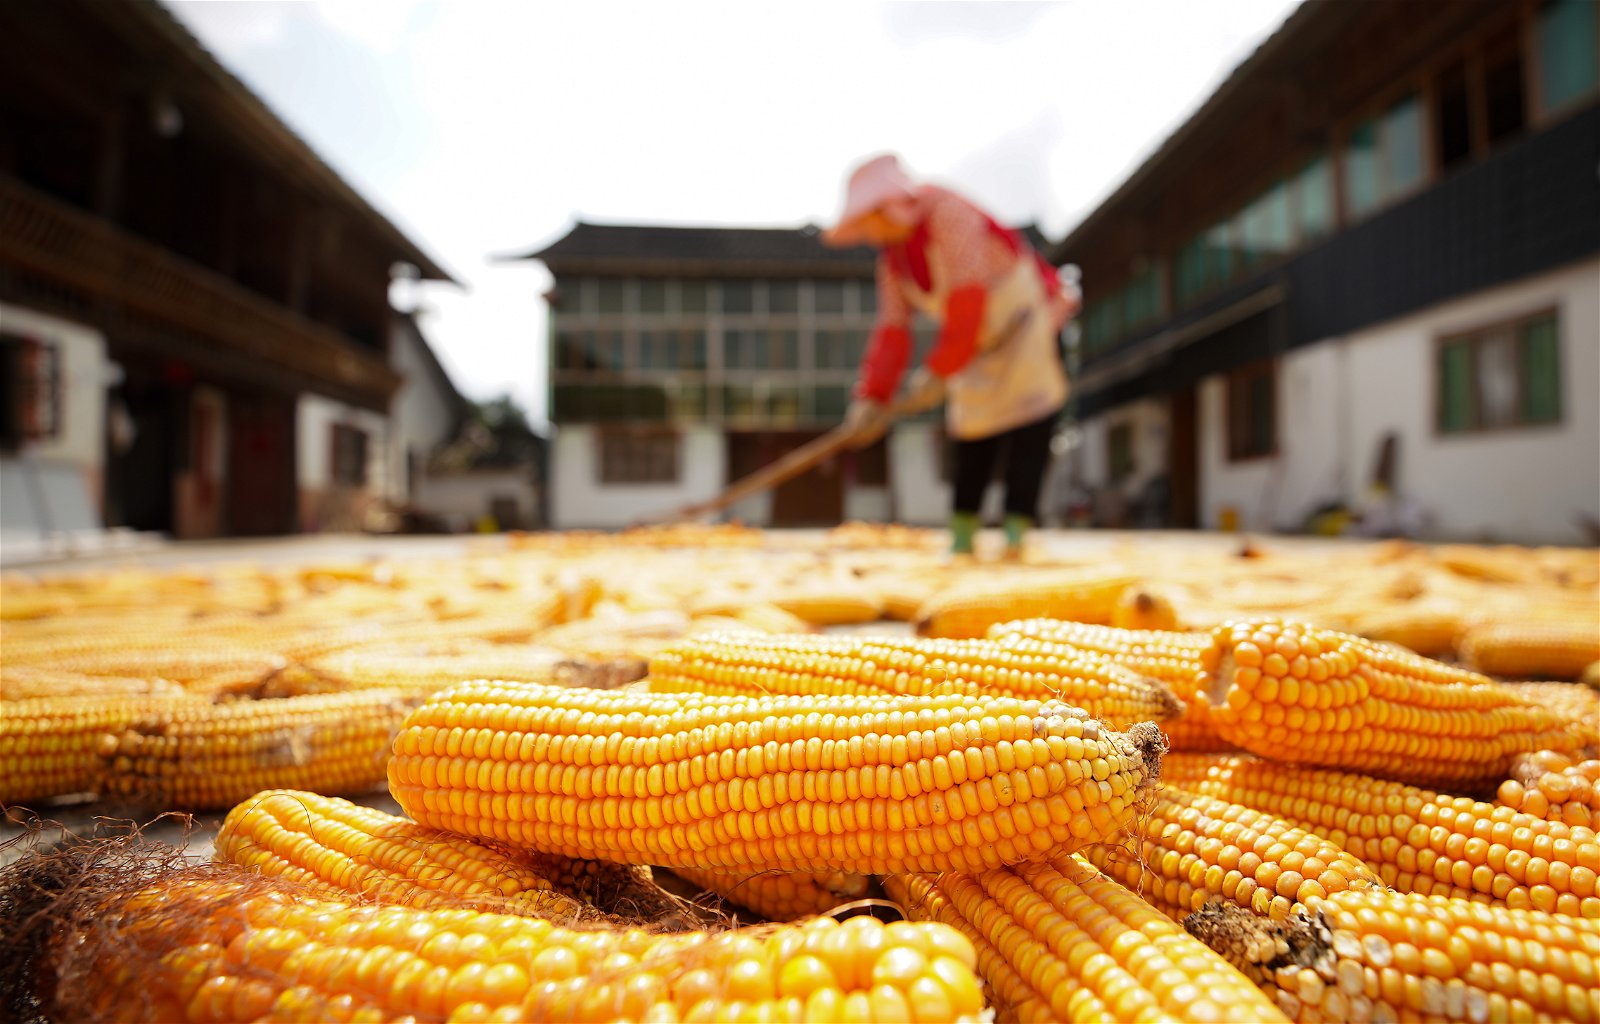 “China must be able to feed its own people”: 170,000 hectares of land were confiscated to achieve food security for the country